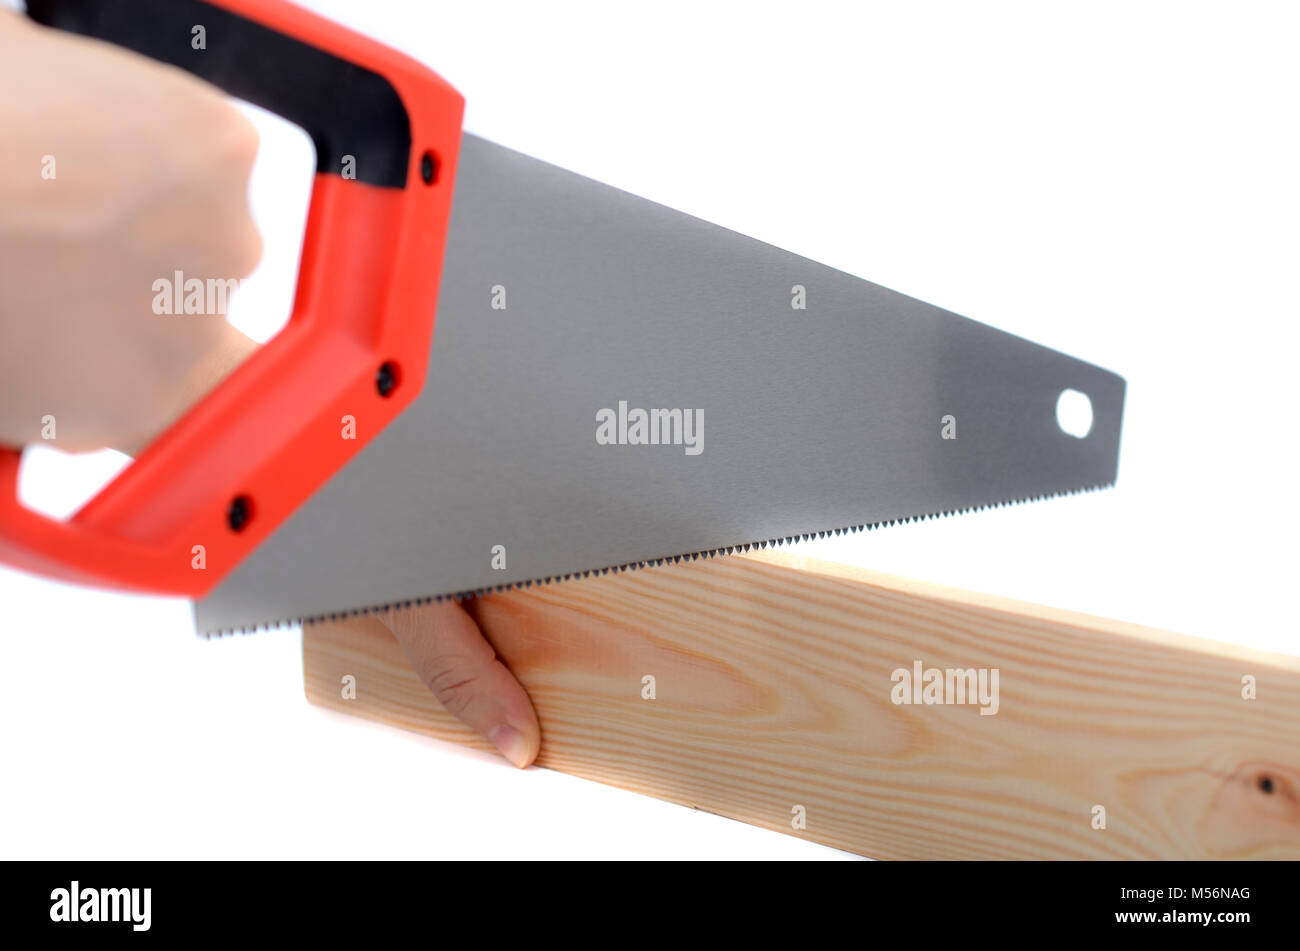 Cutting the board with a handheld saw without protective gloves,  the concept of an injury at work. Stock Photo